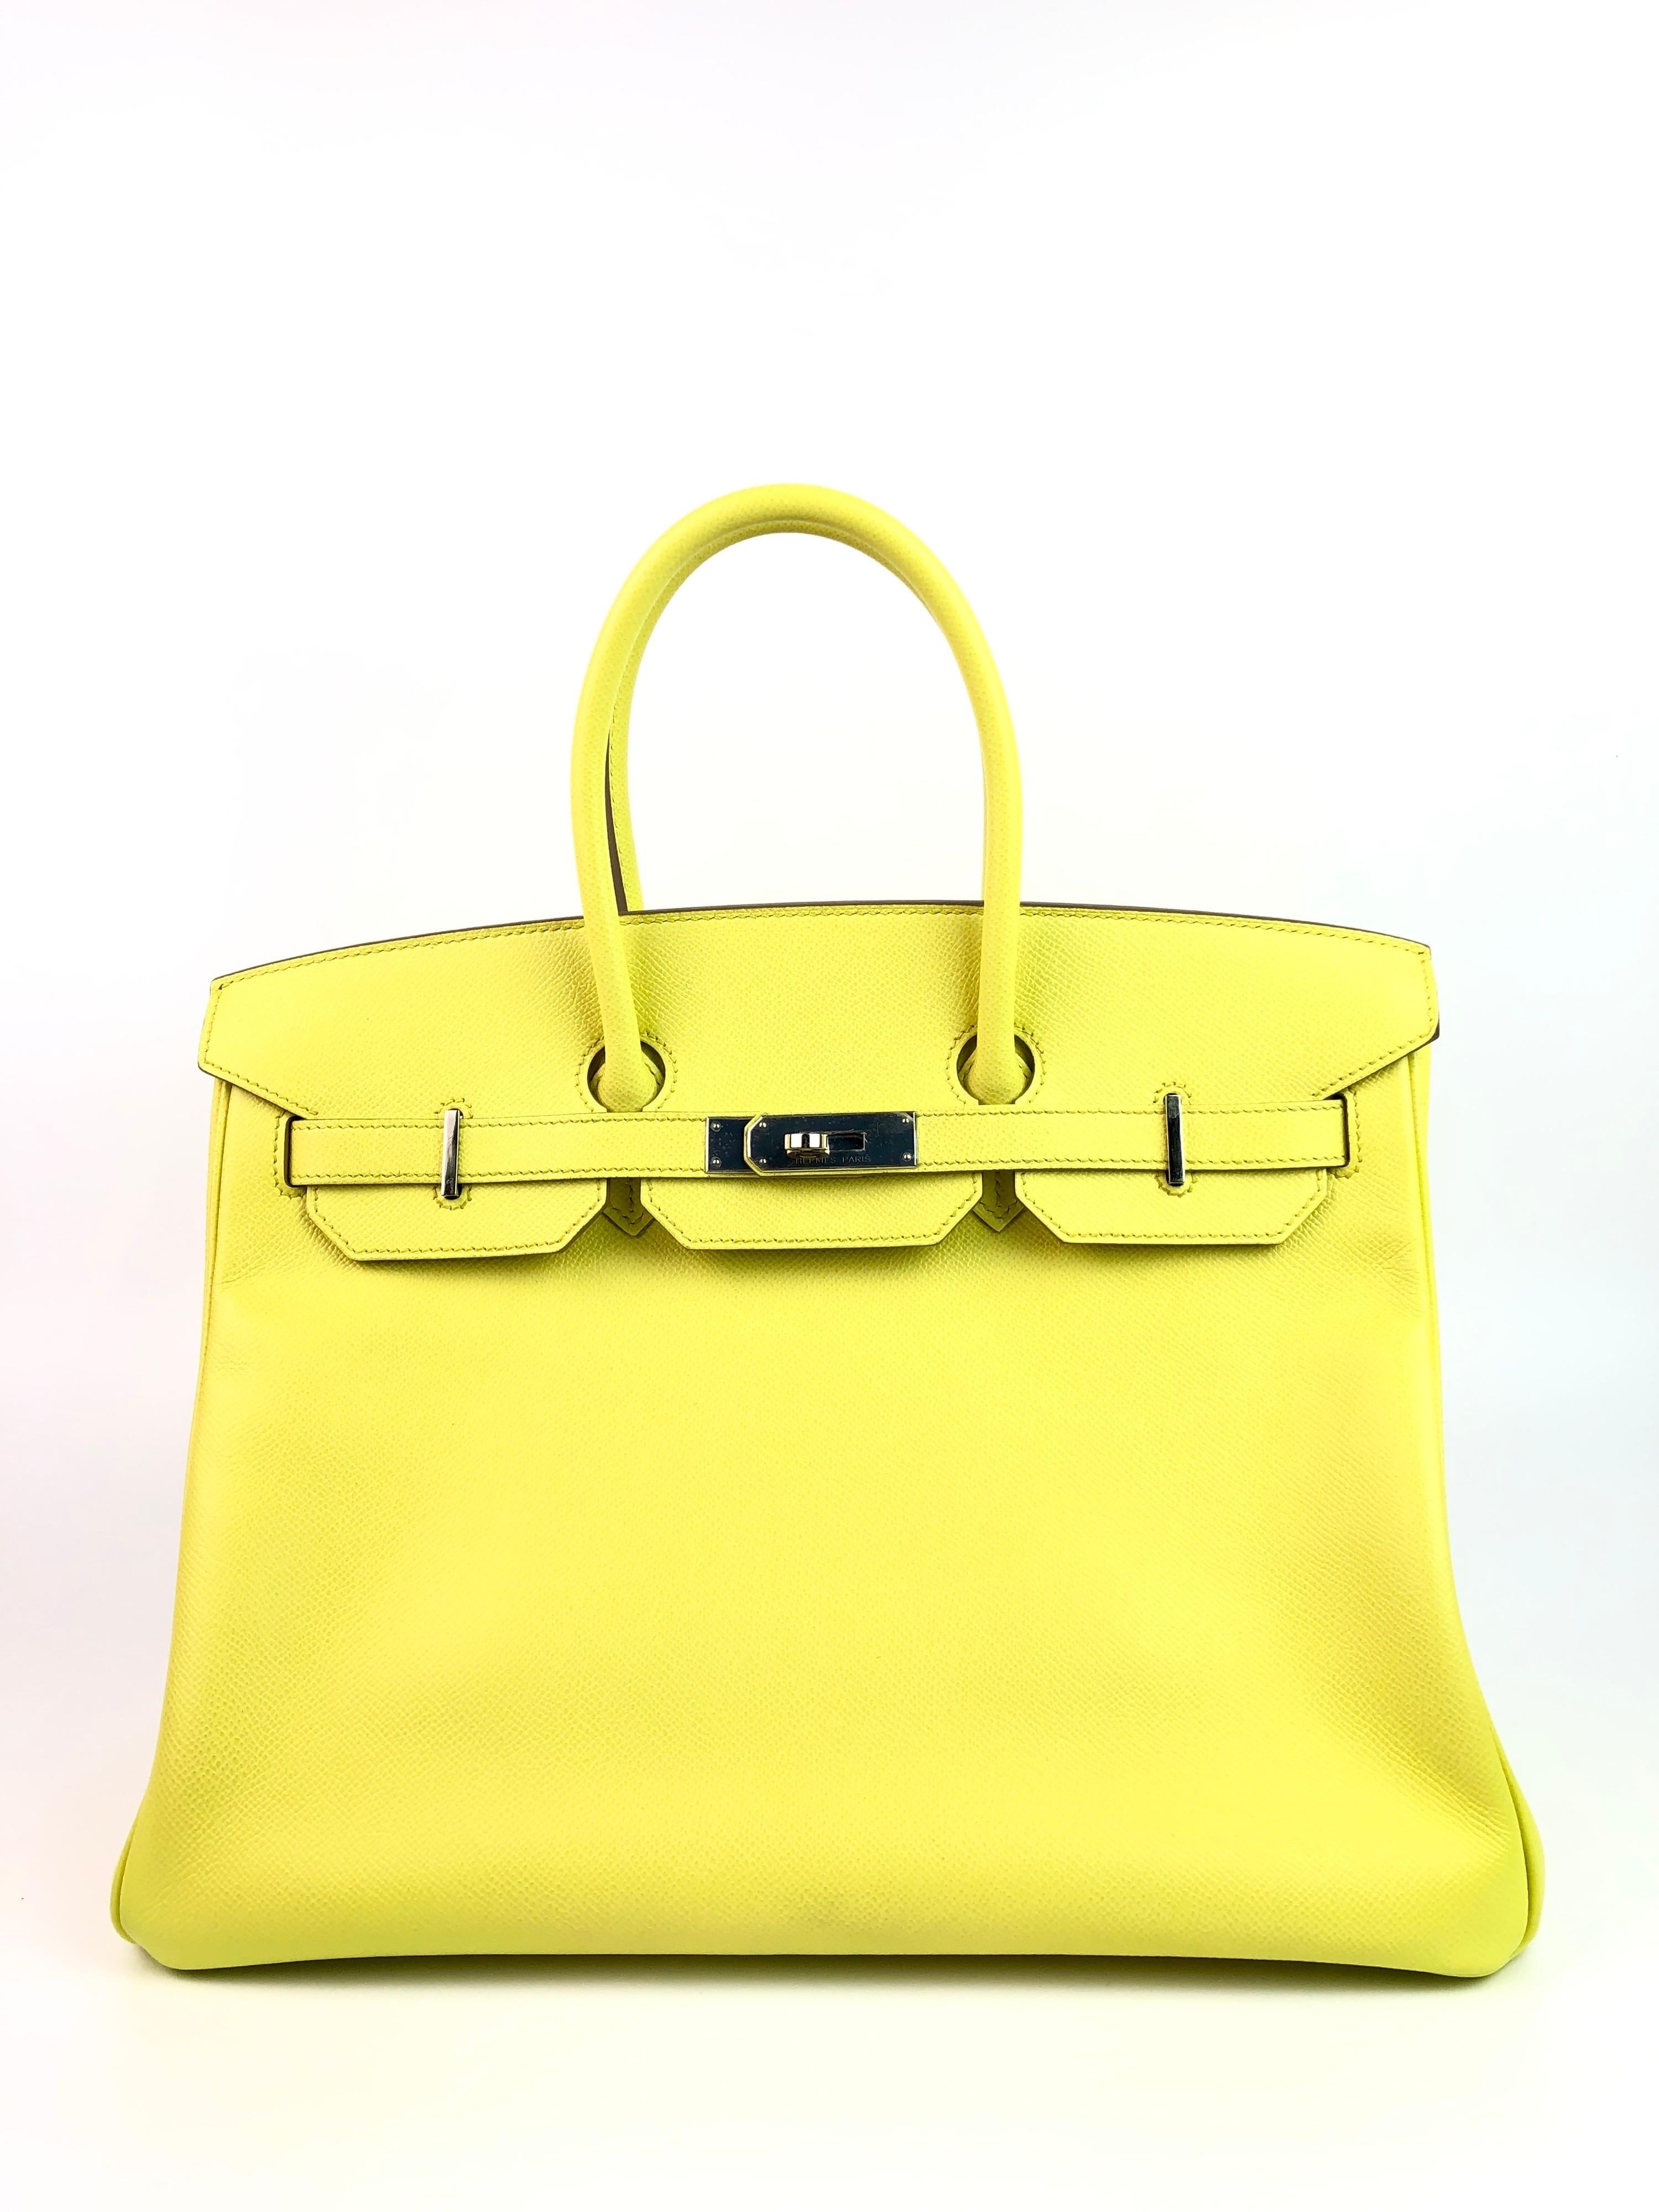 HERMES BIRKIN 35 SOUFRE YELLOW EPSOM PALLADIUM HARDWARE. Excellent condition with Plastic on Hardware, perfect corners and Excellent structure. 

Shop with Confidence from Lux Addicts. Authenticity Guaranteed!